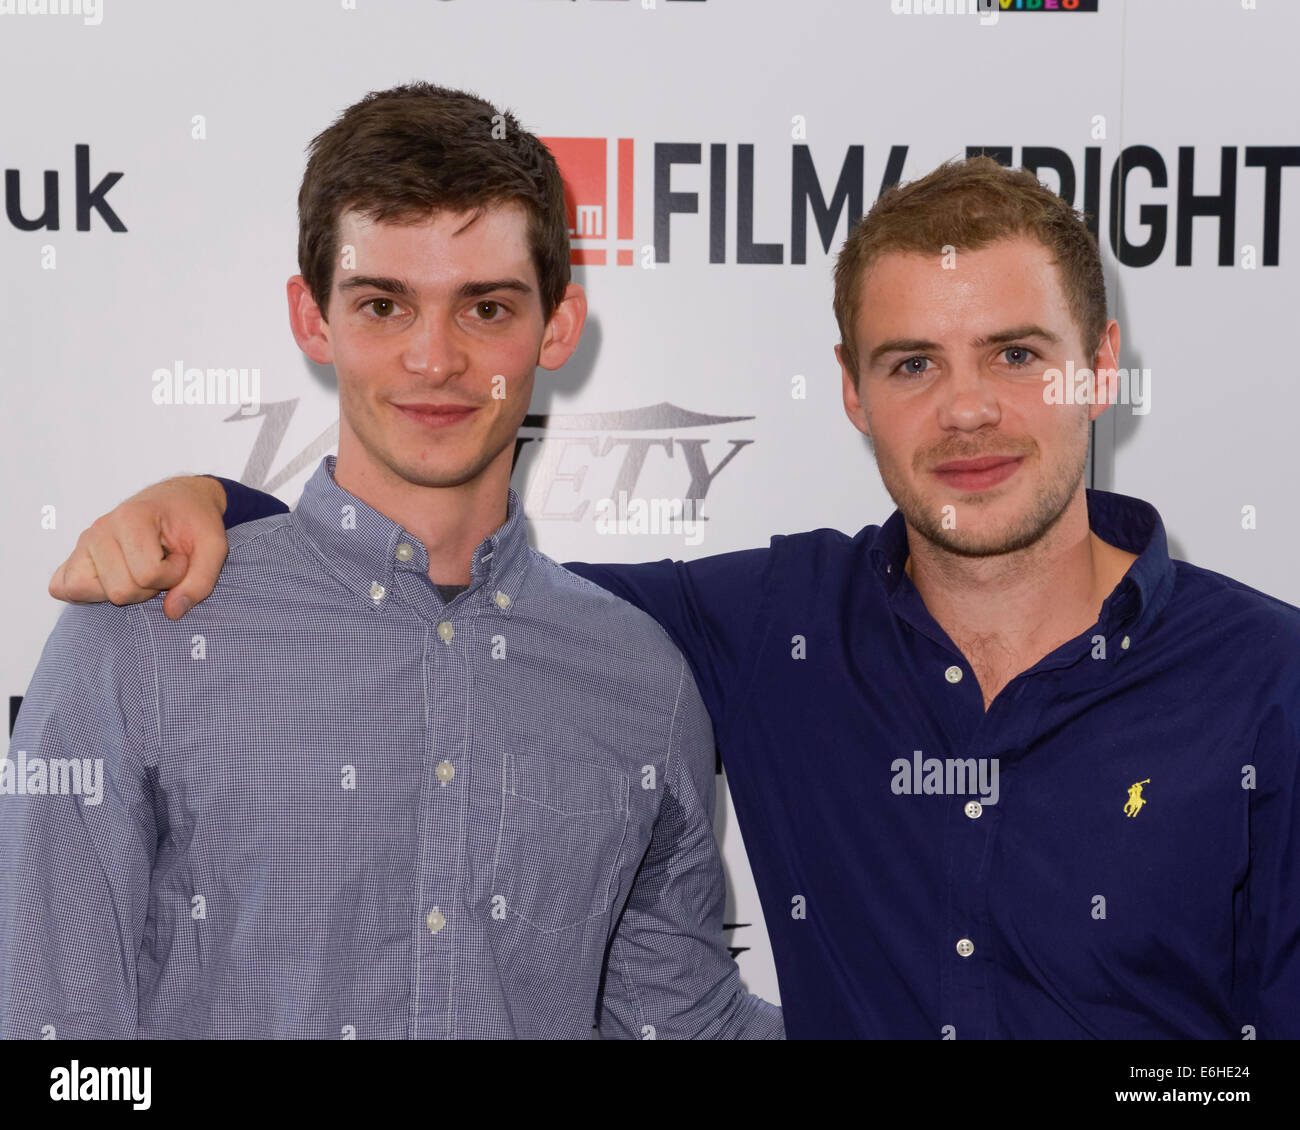 The 15th Film4 Frightfest on 23/08/2014 at The VUE West End, London. The cast attend the World Premiere of The Mirror.  Persons pictured: Joshua Dickinson, Nate Fallows. Picture by Julie Edwards Stock Photo